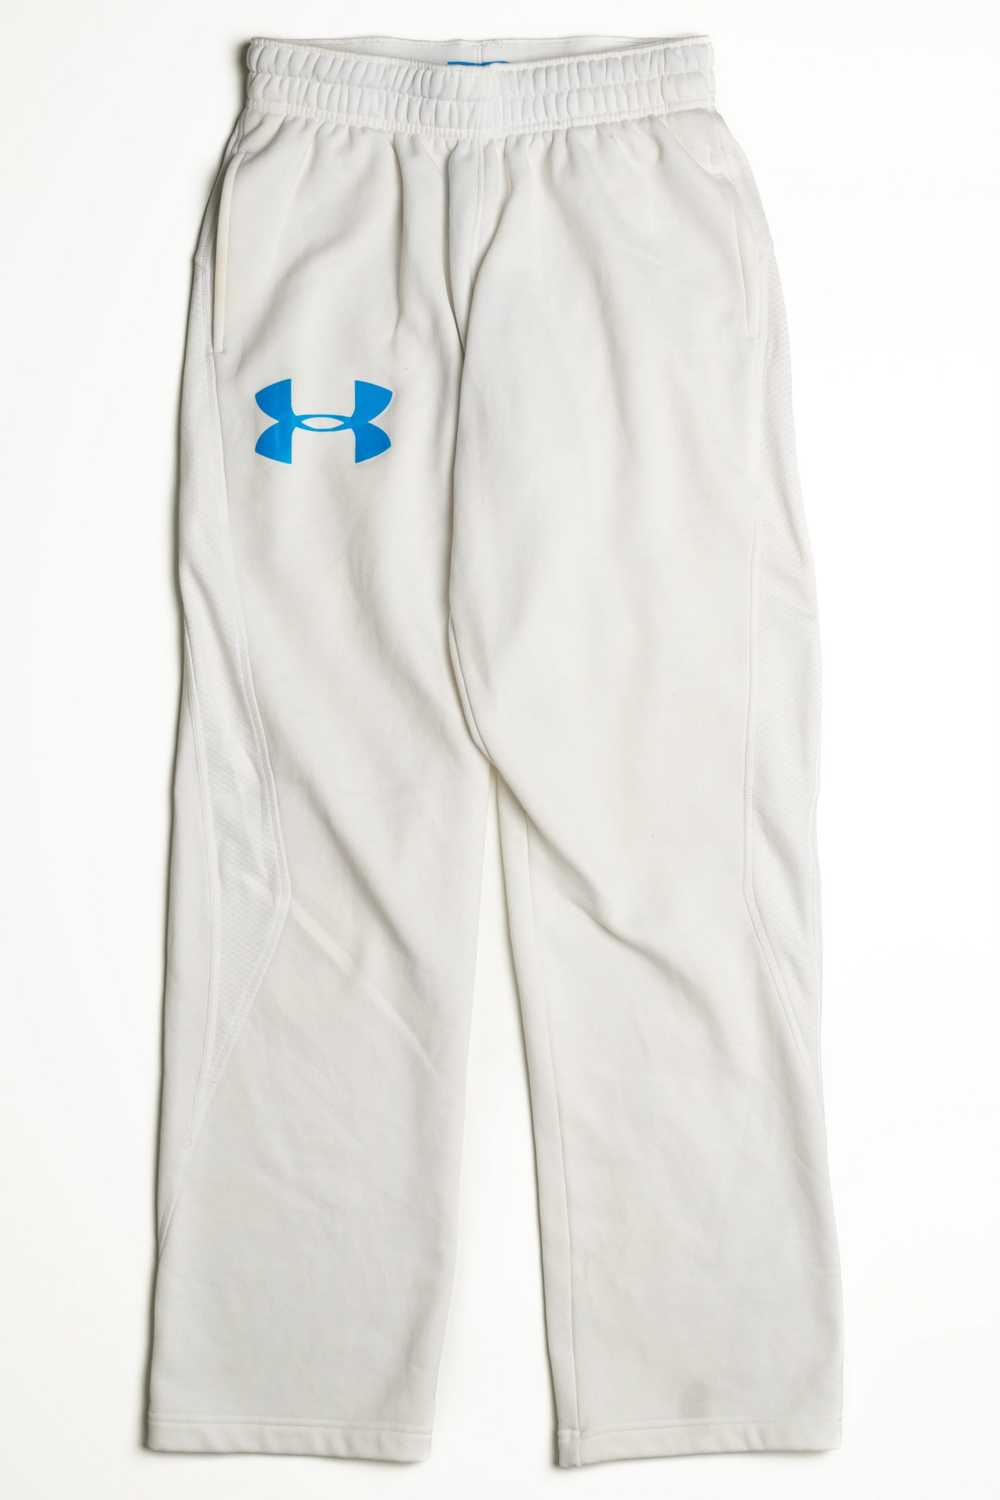 Under Armour Track Pants - image 1